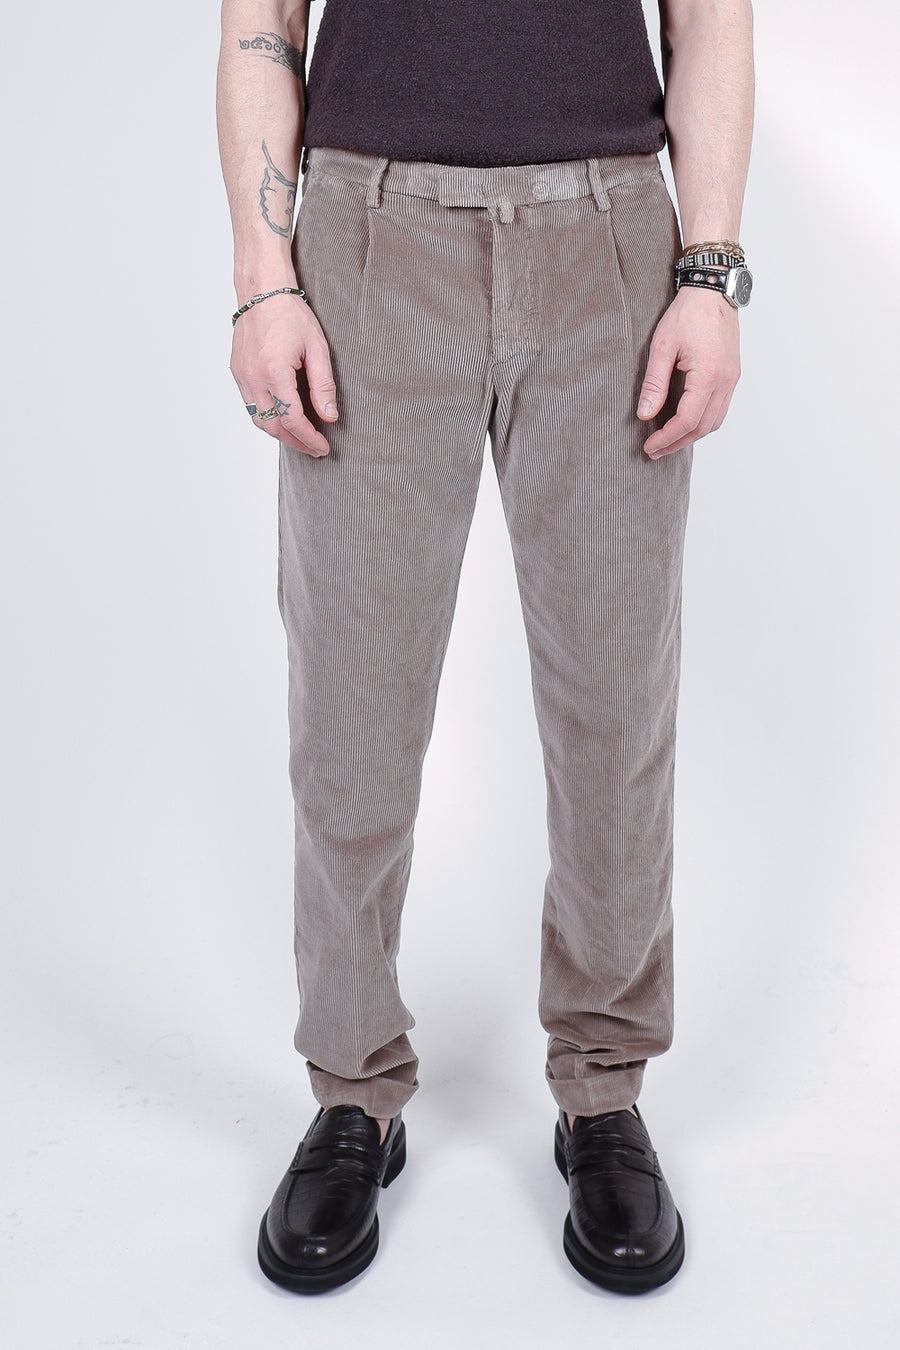 Buy the Briglia Italian Corduroy Trouser in Taupe at Intro. Spend £50 for free UK delivery. Official stockists. We ship worldwide.